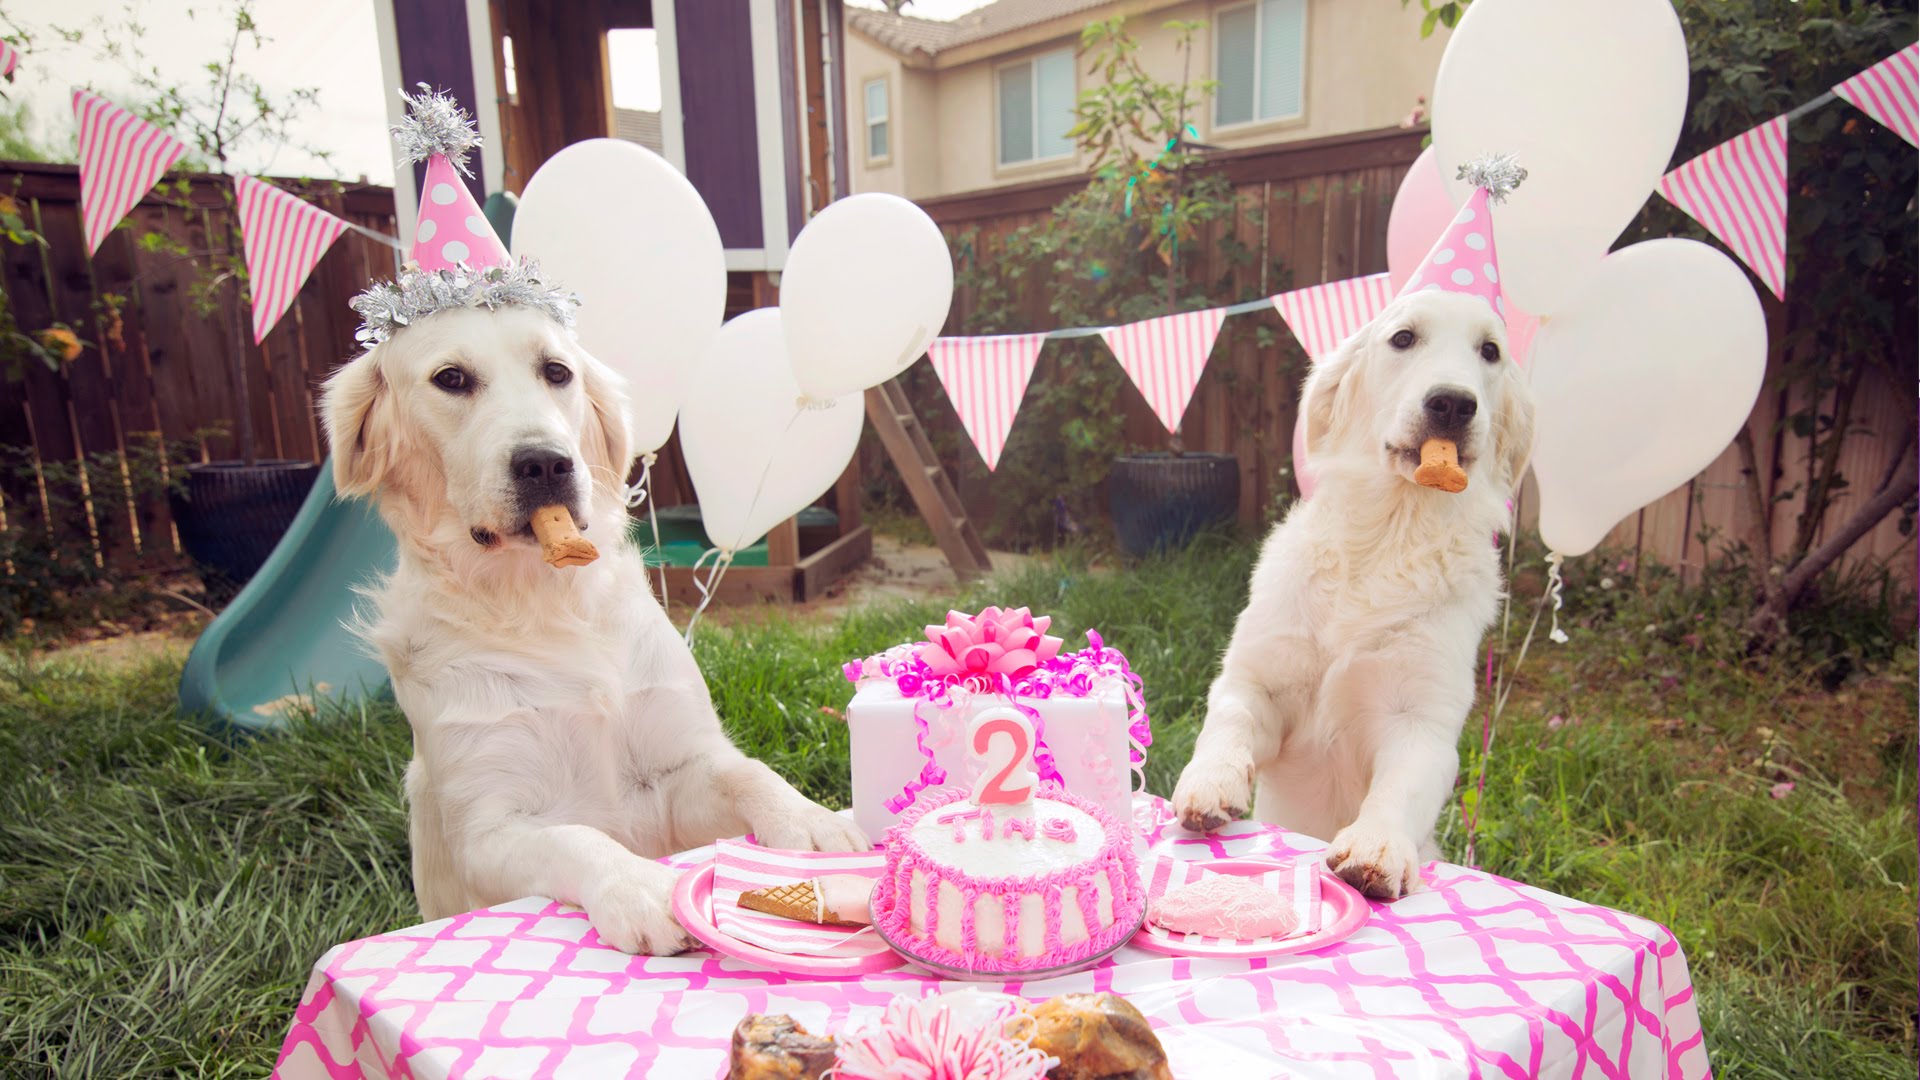 two Golden Retrievers wearing pink cone hats standing up against the table with cake celebrating their birthday